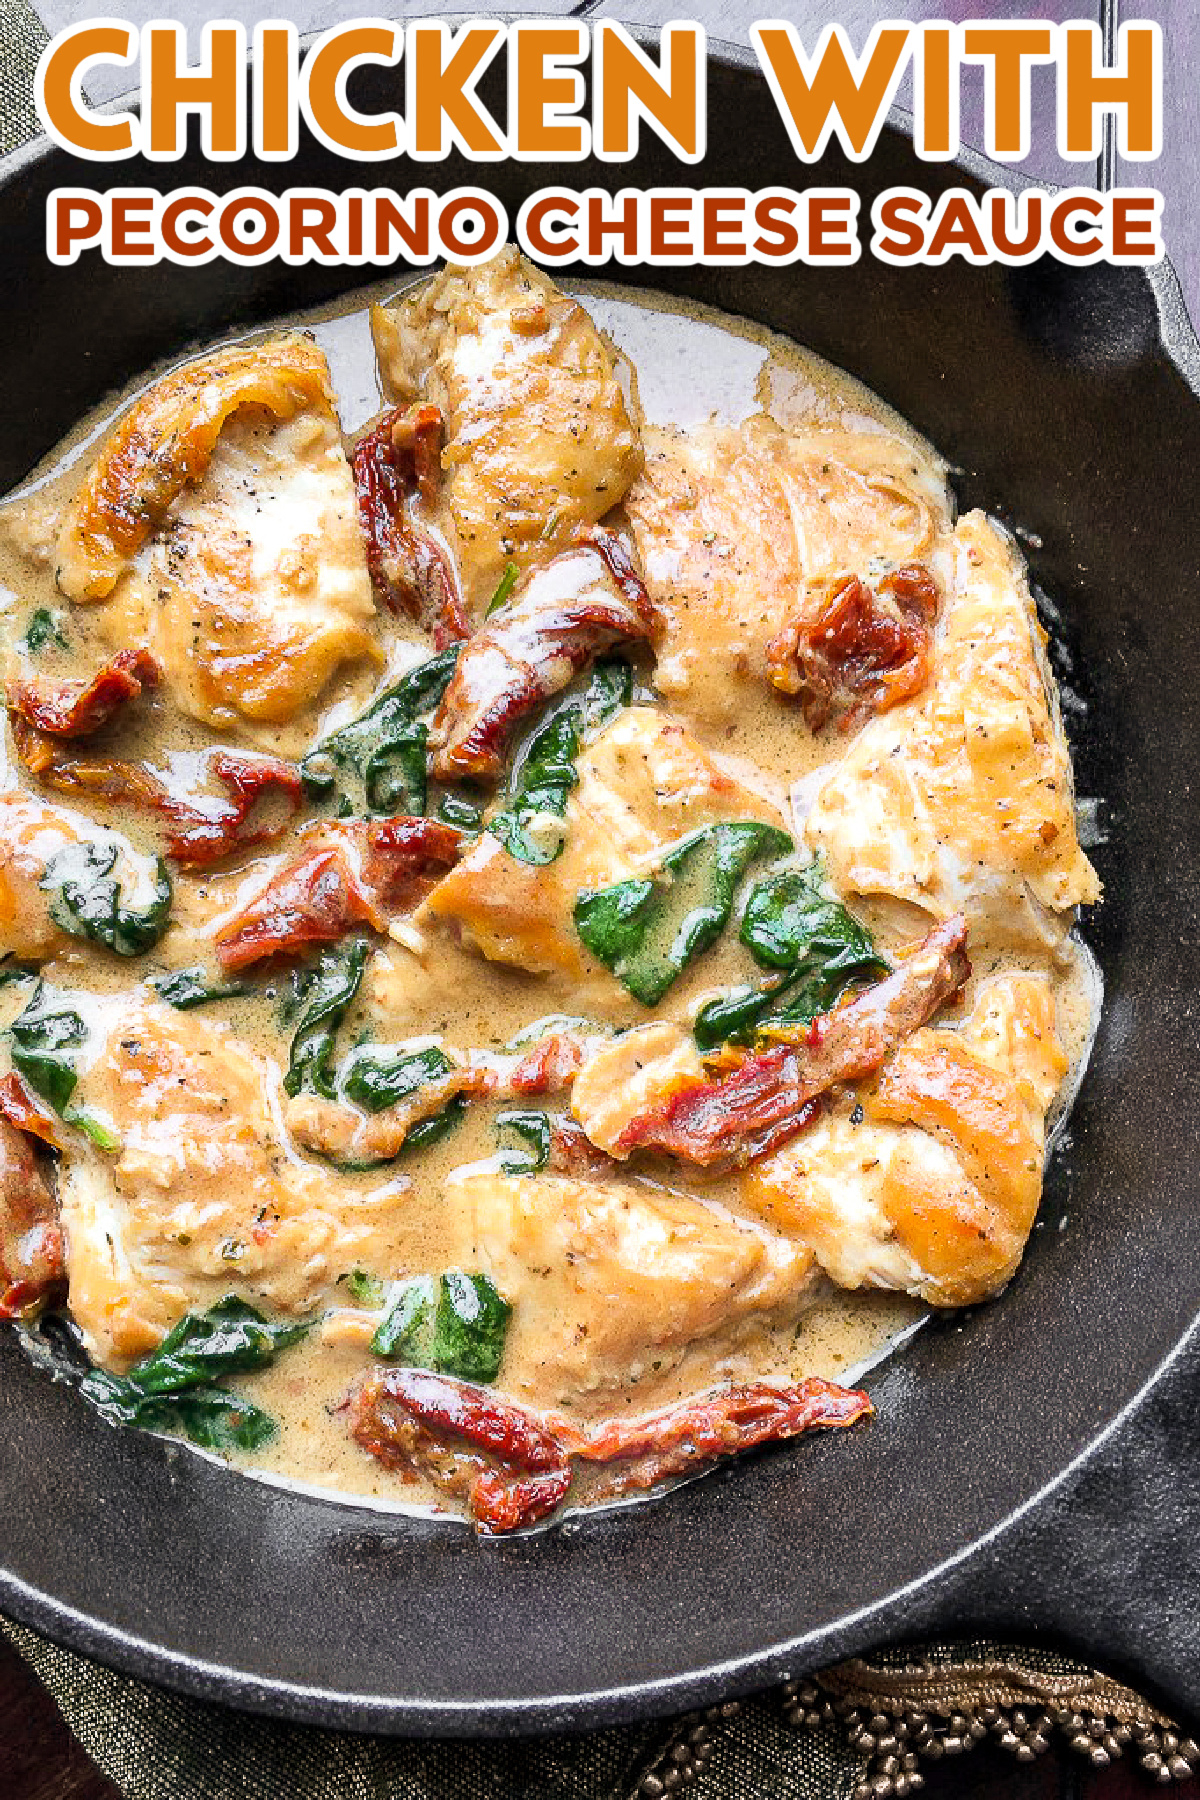 This Chicken with Pecorino Cream Sauce recipe is a creamy, delicious Italian inspired dinner idea perfect for any night of the week.